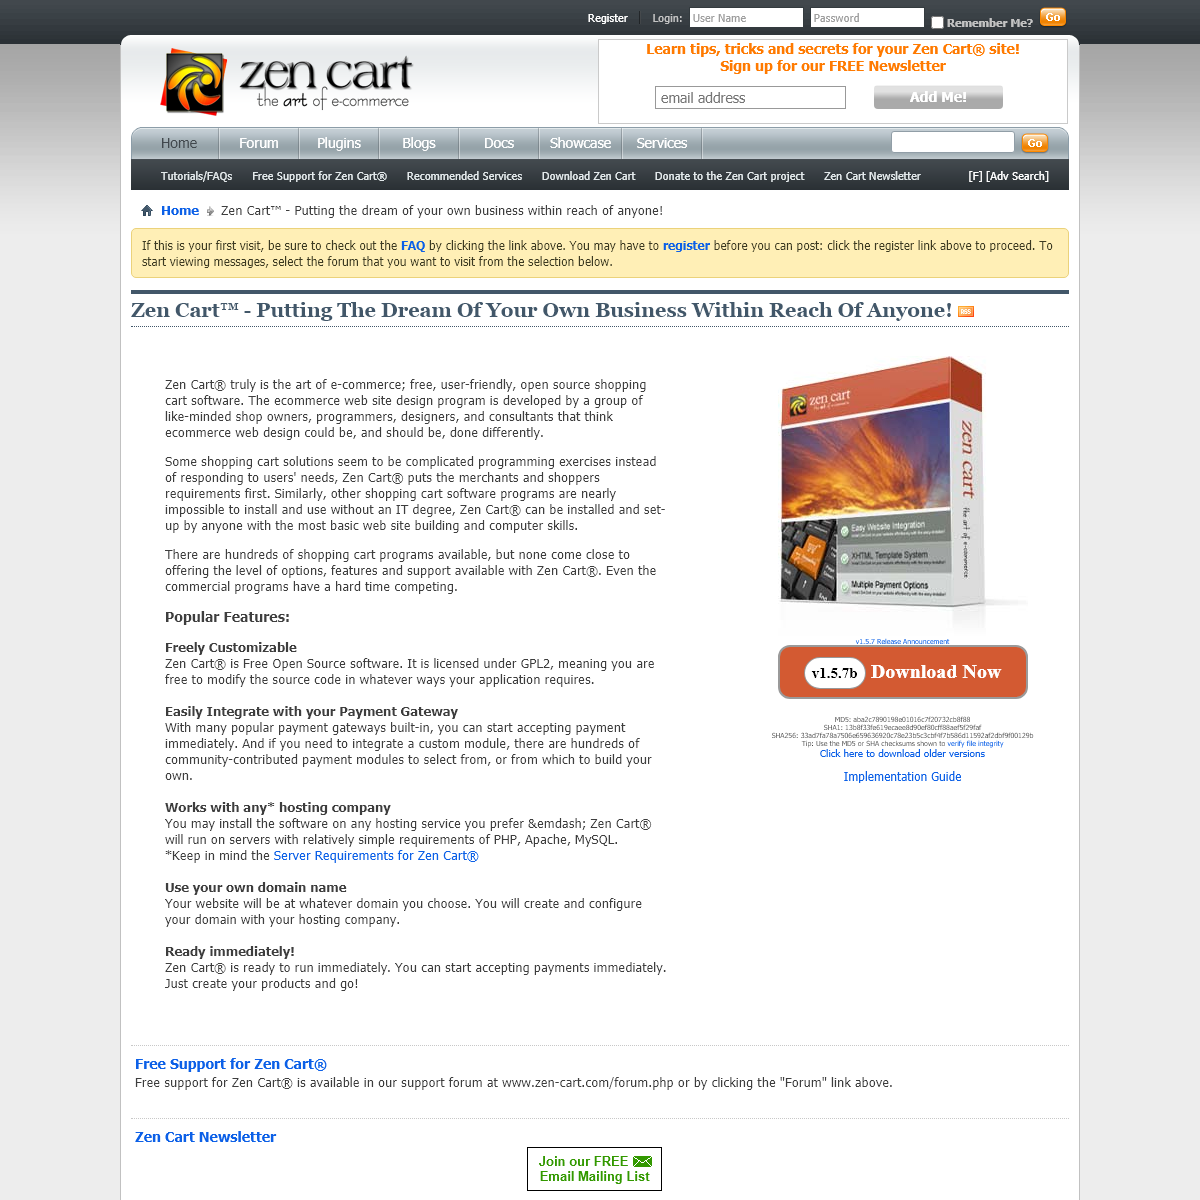 Zen Cart Support - Zen Cartâ„¢ - Putting the dream of your own business within reach of anyone!